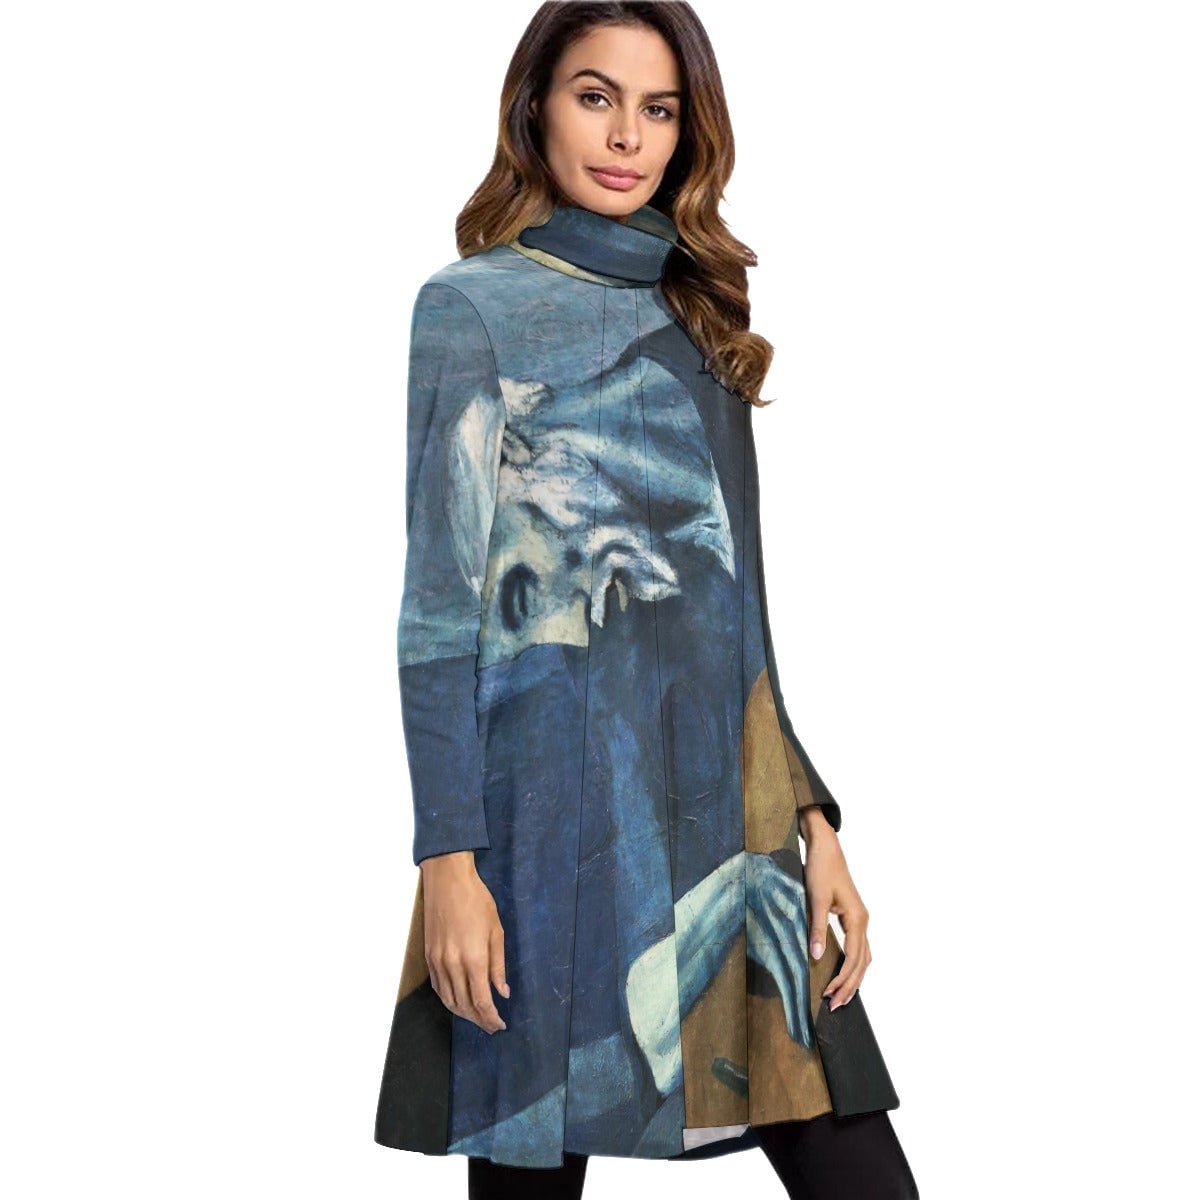 The Old Guitarist by Pablo Picasso Art Dress Long Sleeve